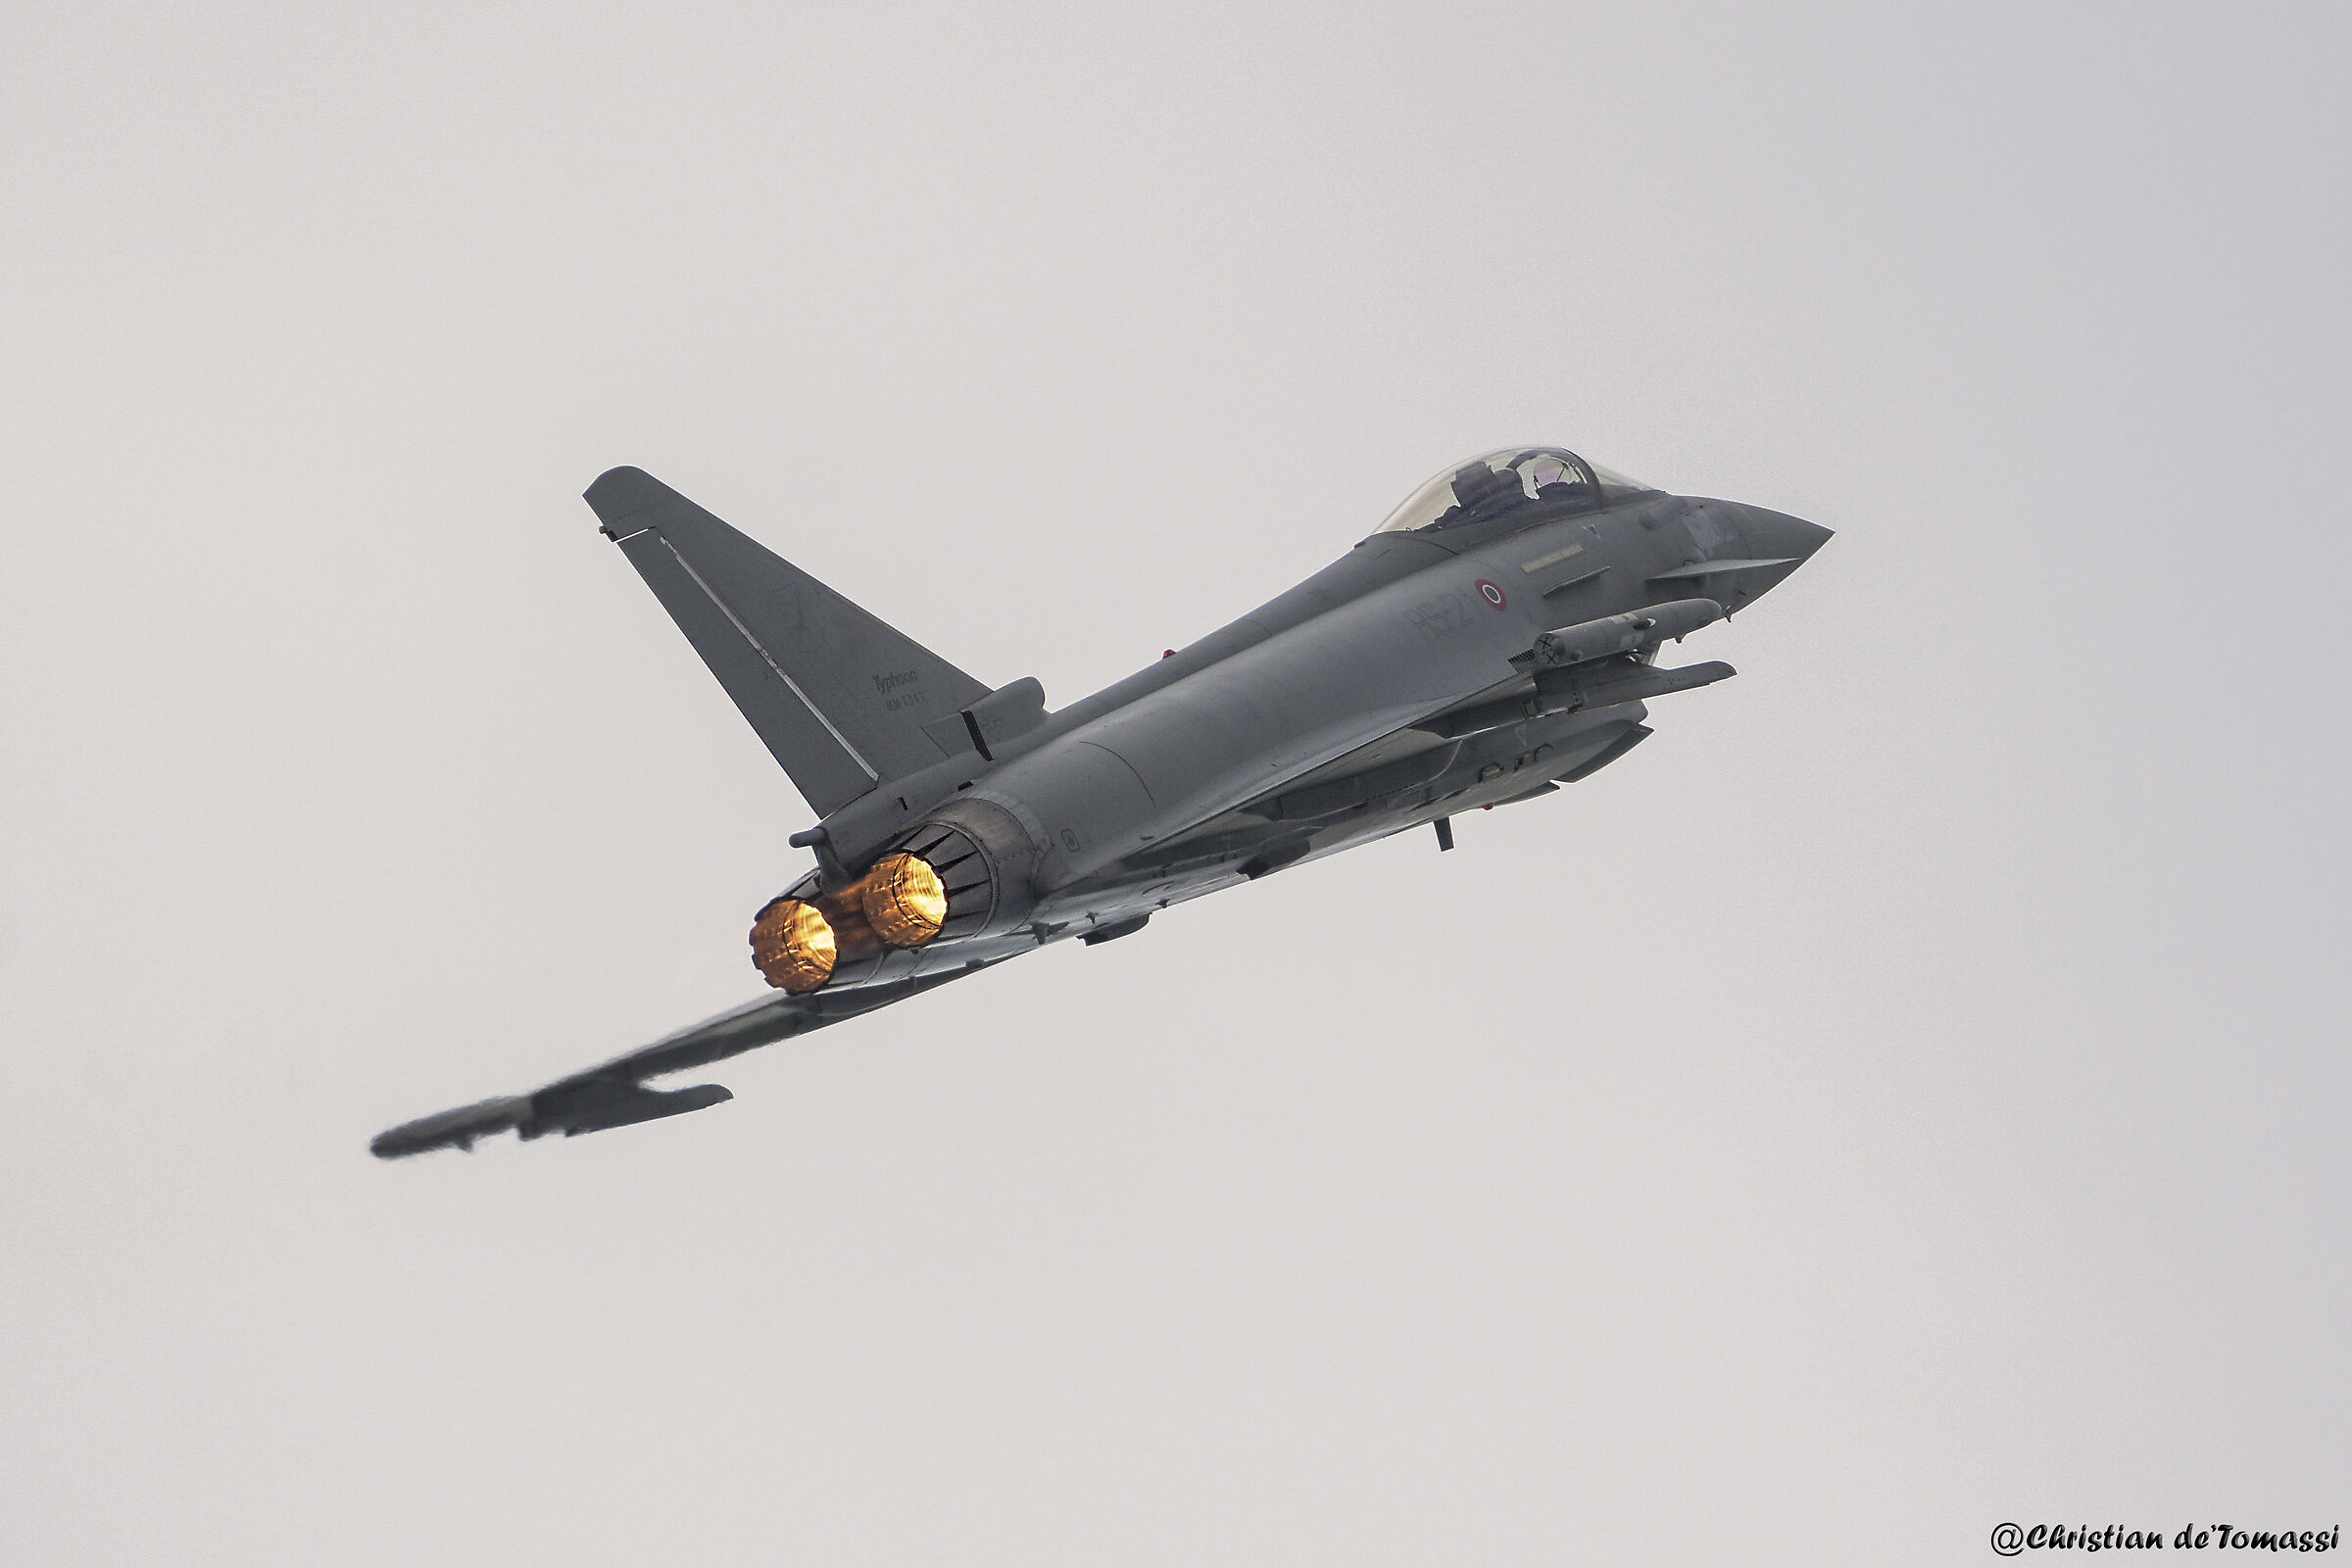 Eurofighter.. Gasss at the bottom...